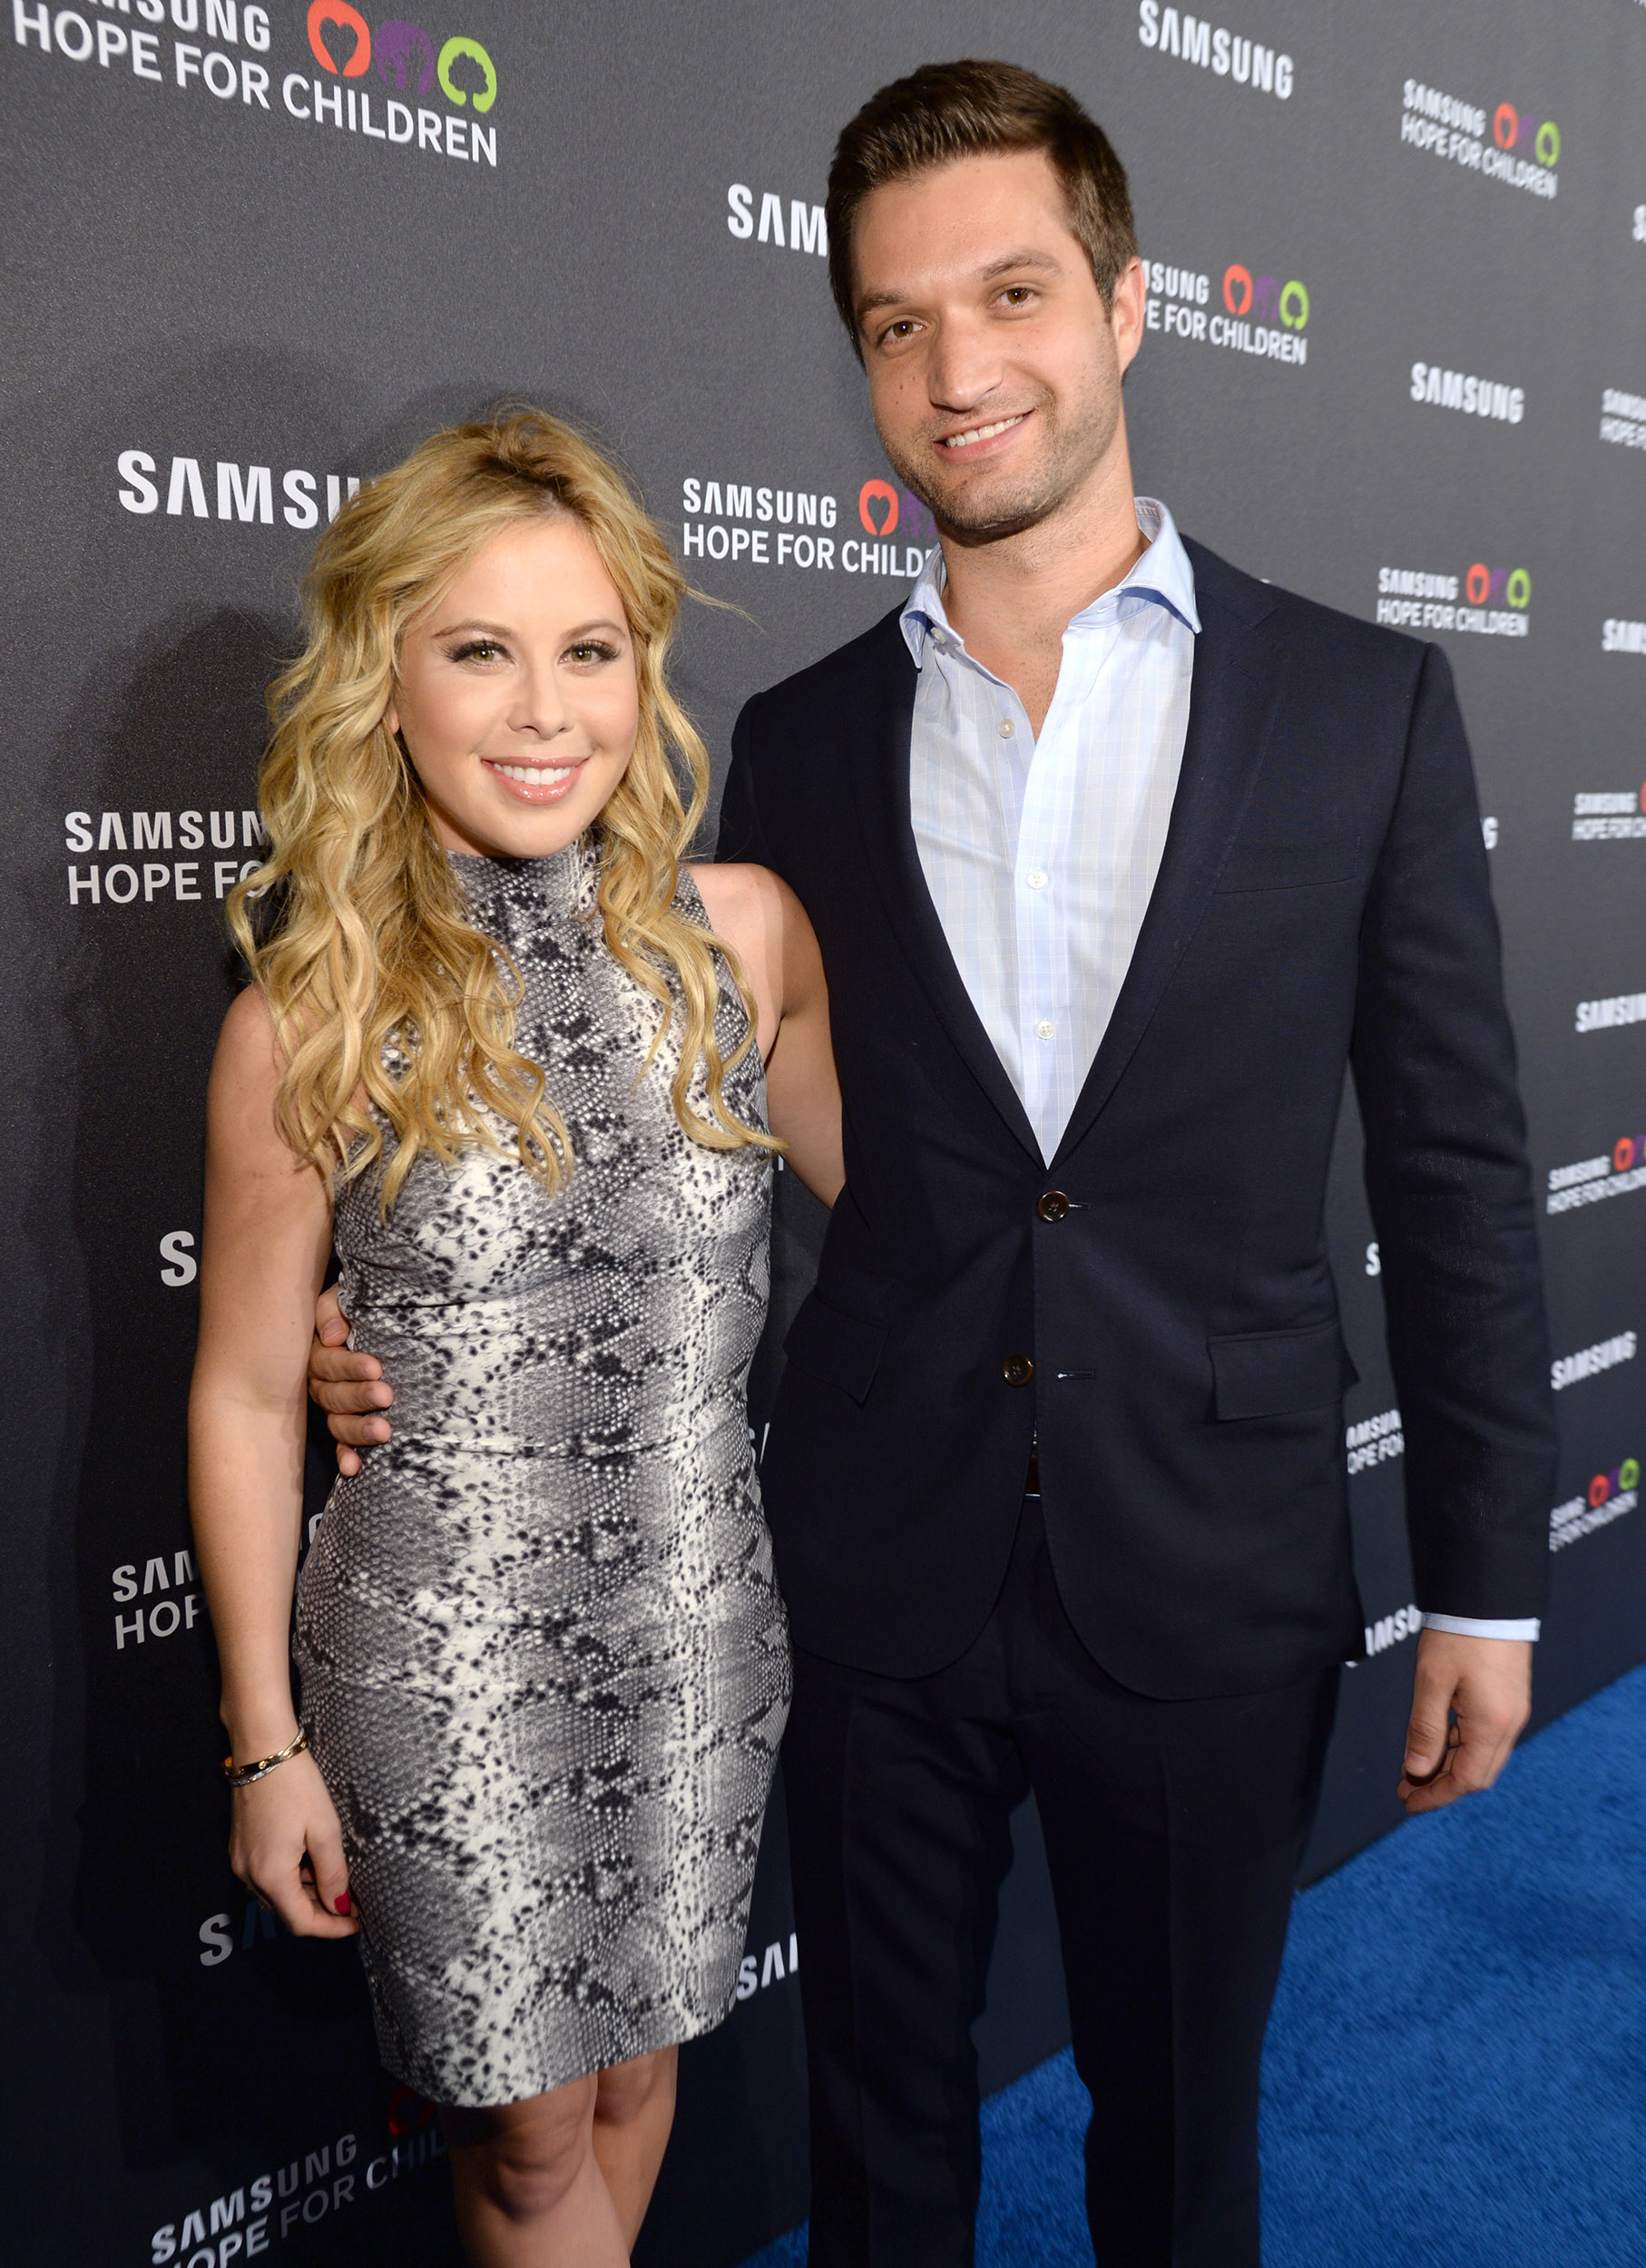 Todd Kapostasy with Tara Lipinski in an event both smiling and dressed nicely